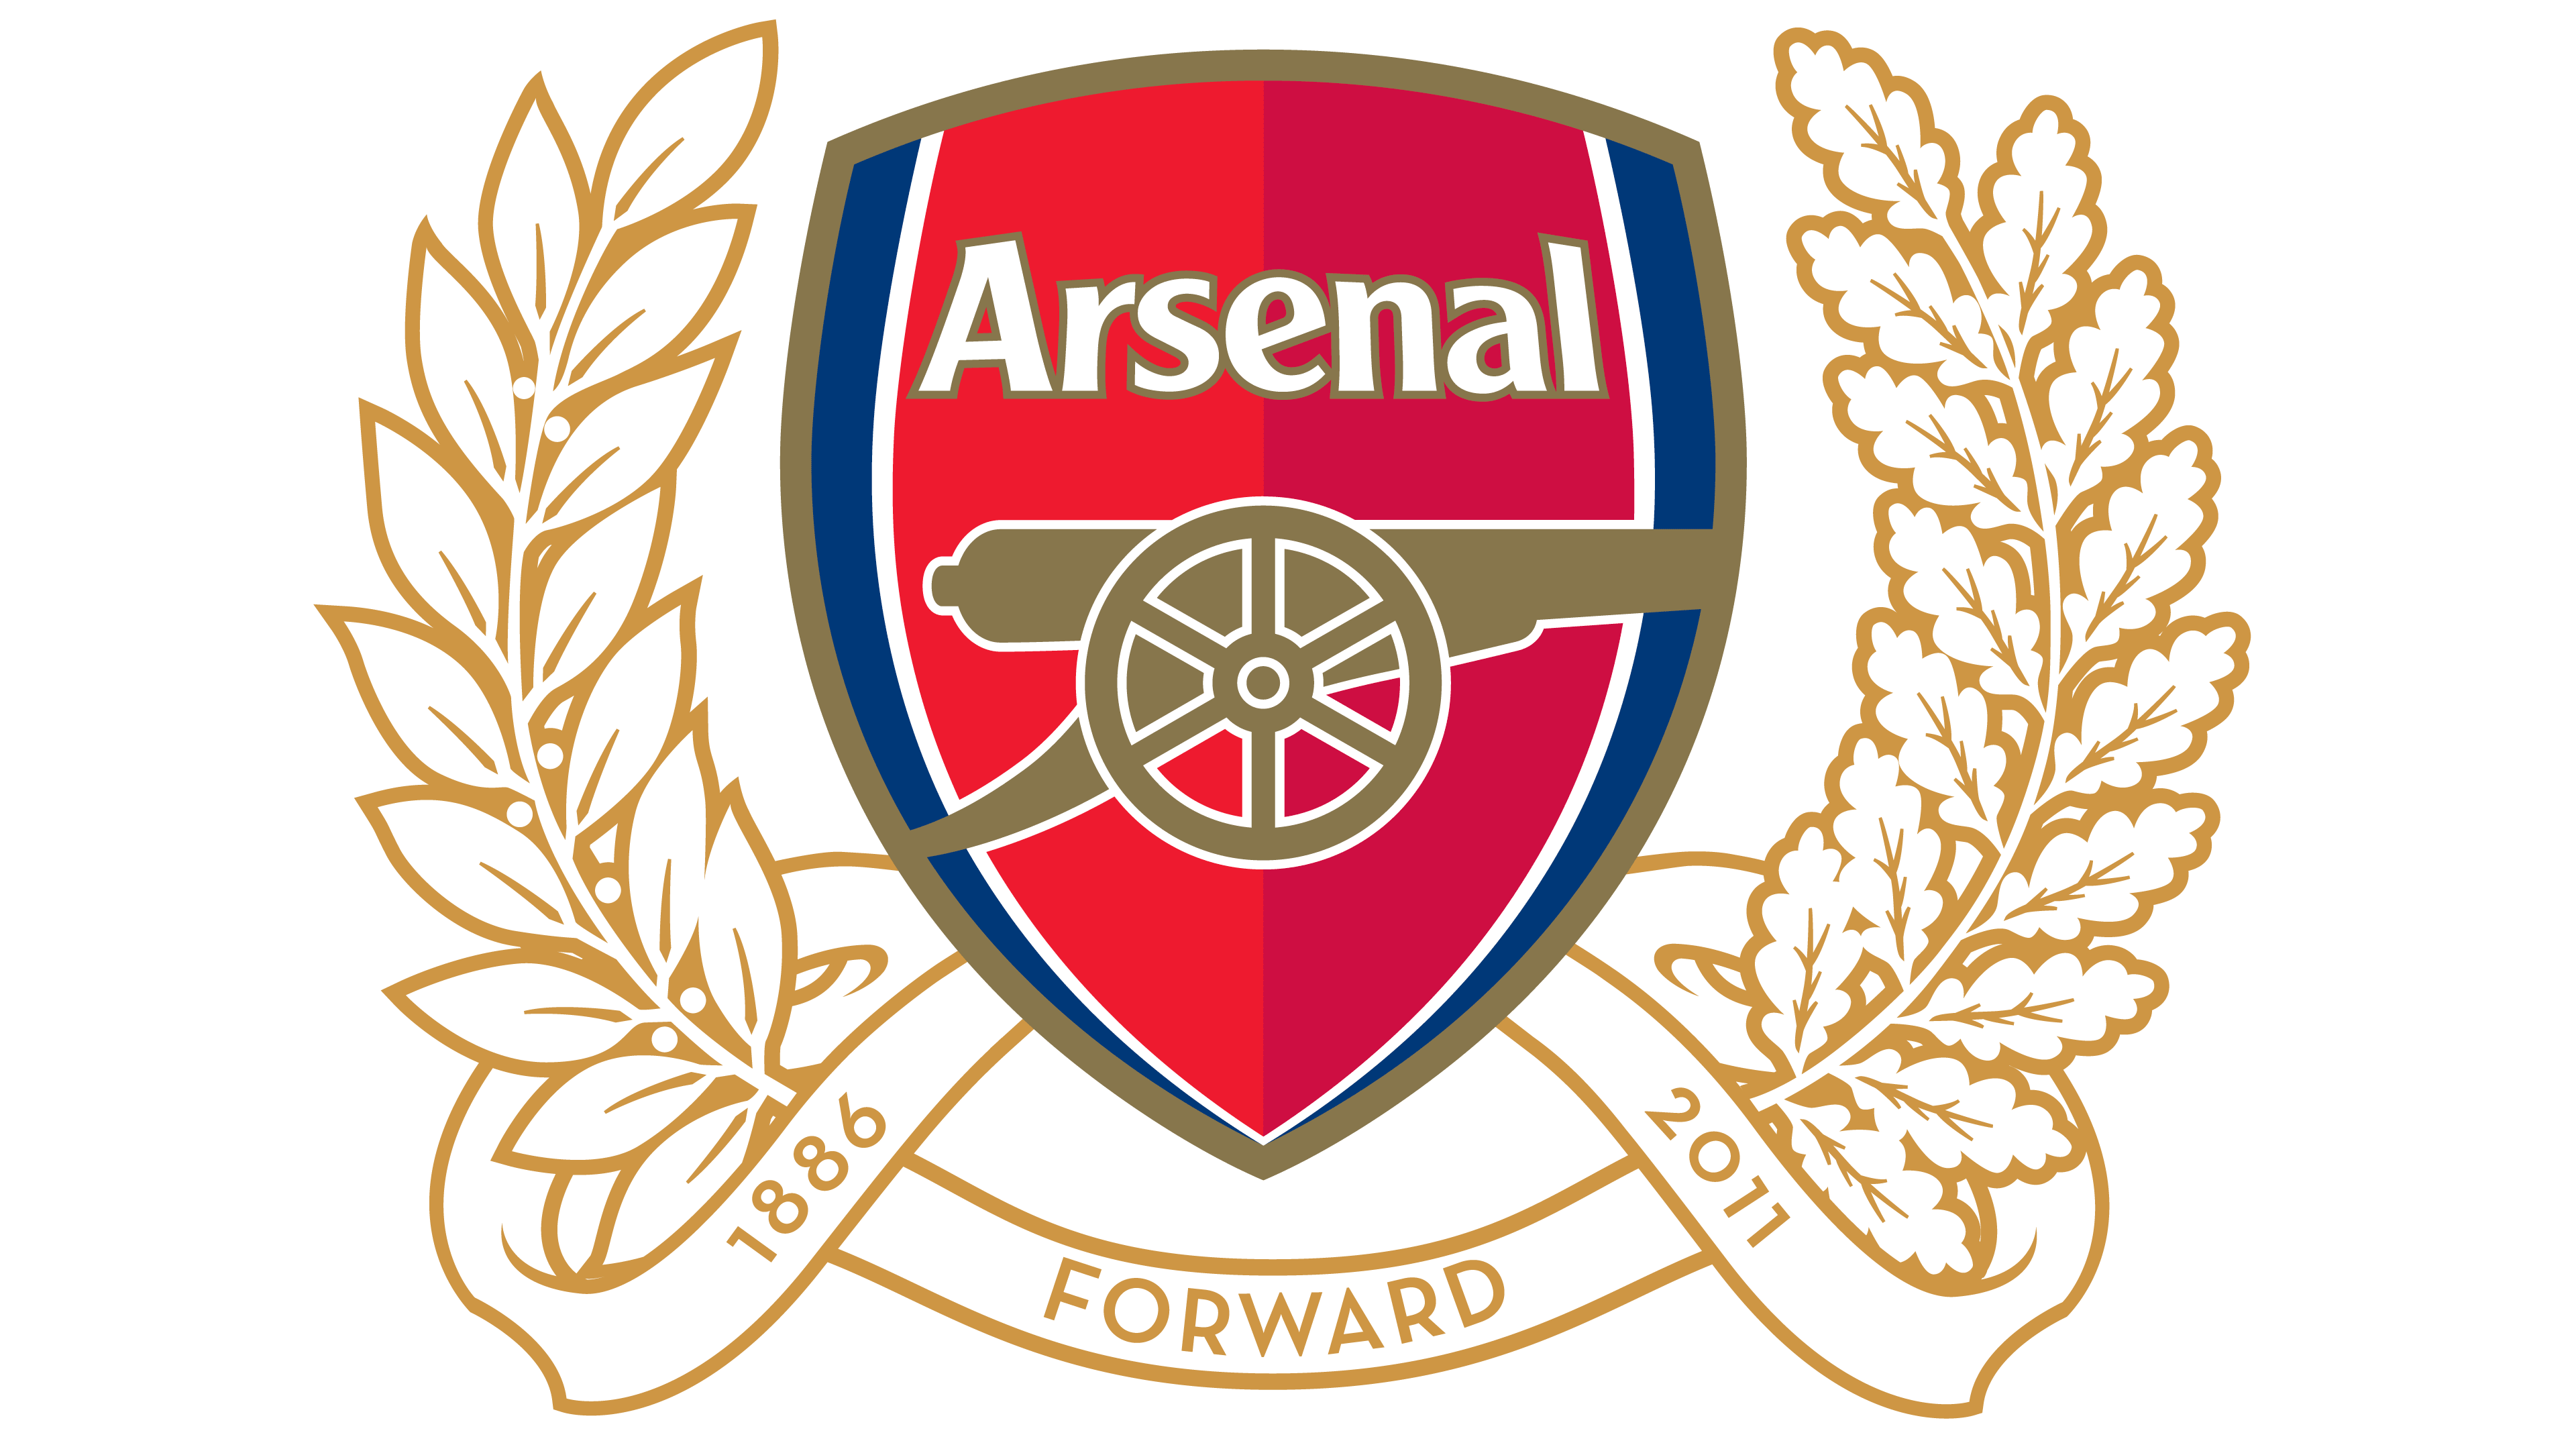 Arsenal Logo. The most famous brands and company logos in the world